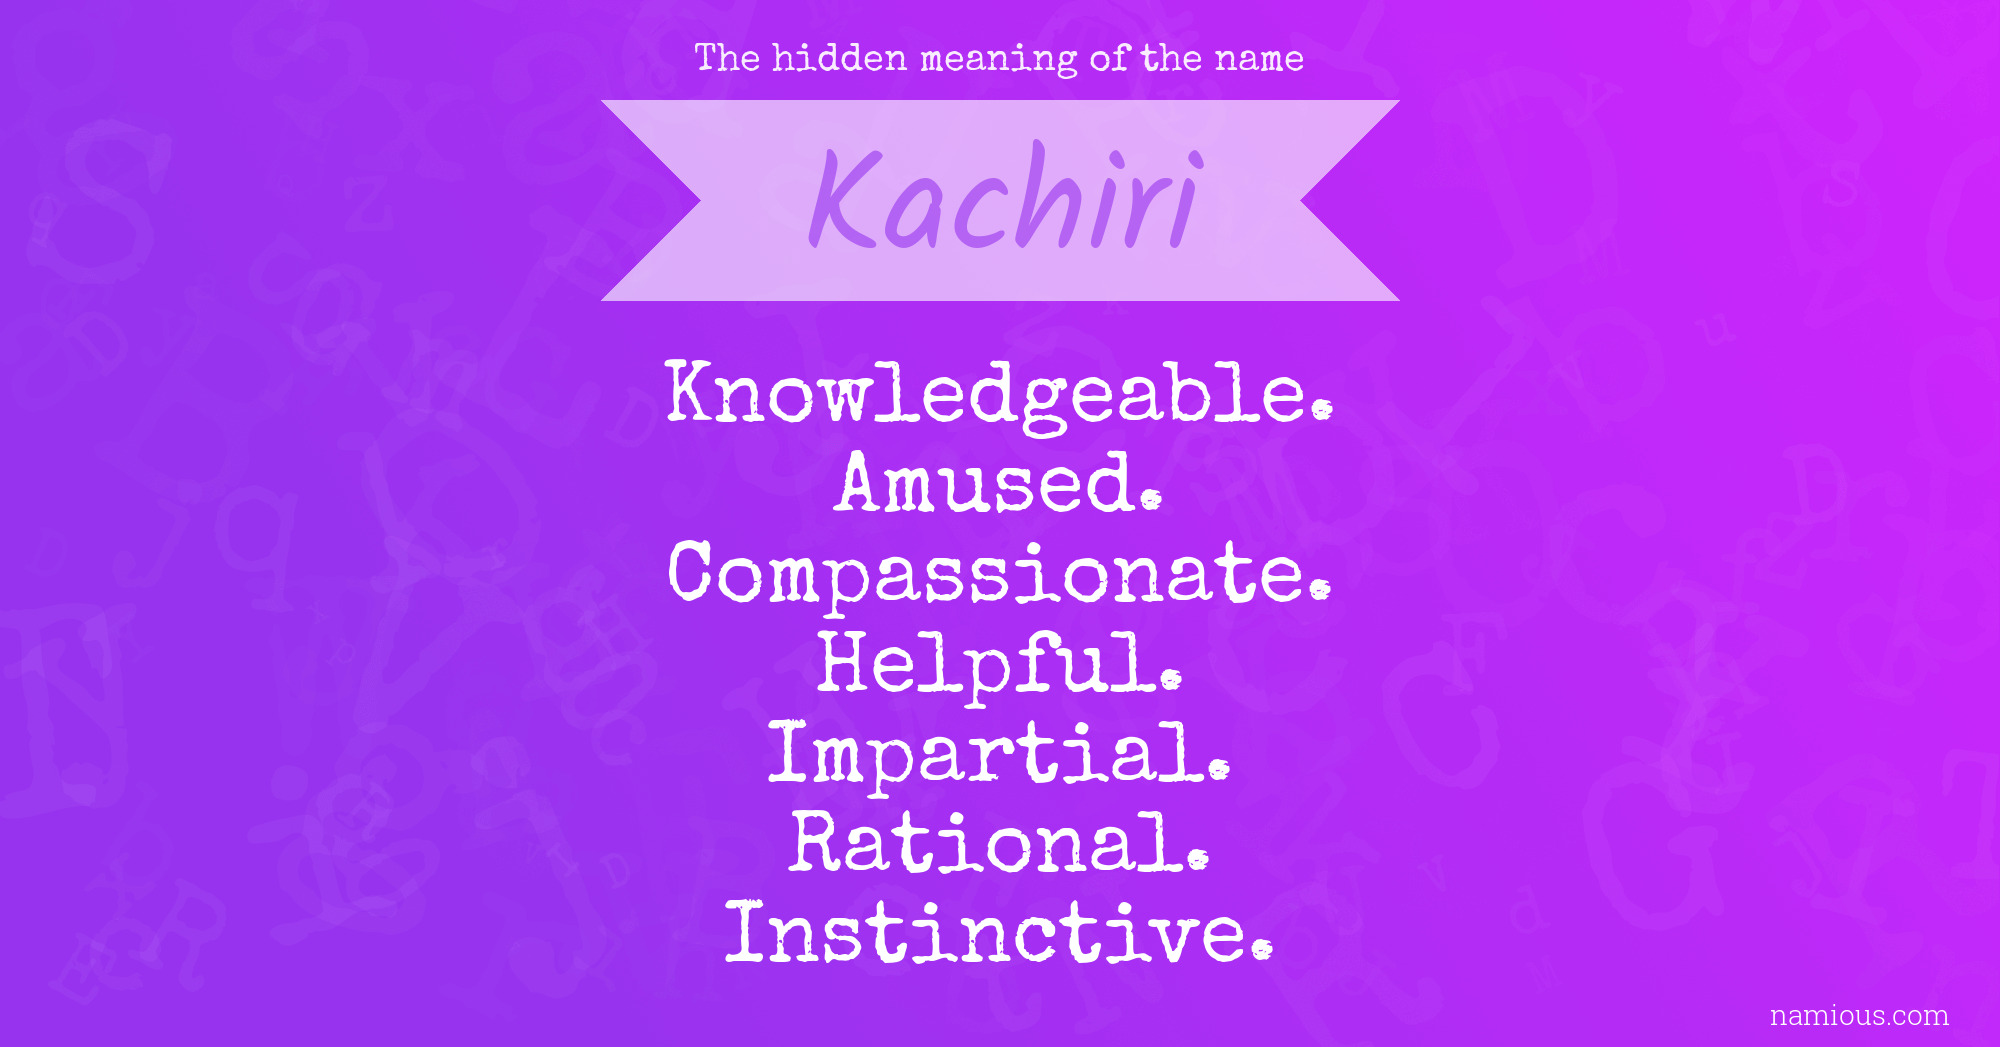 The hidden meaning of the name Kachiri